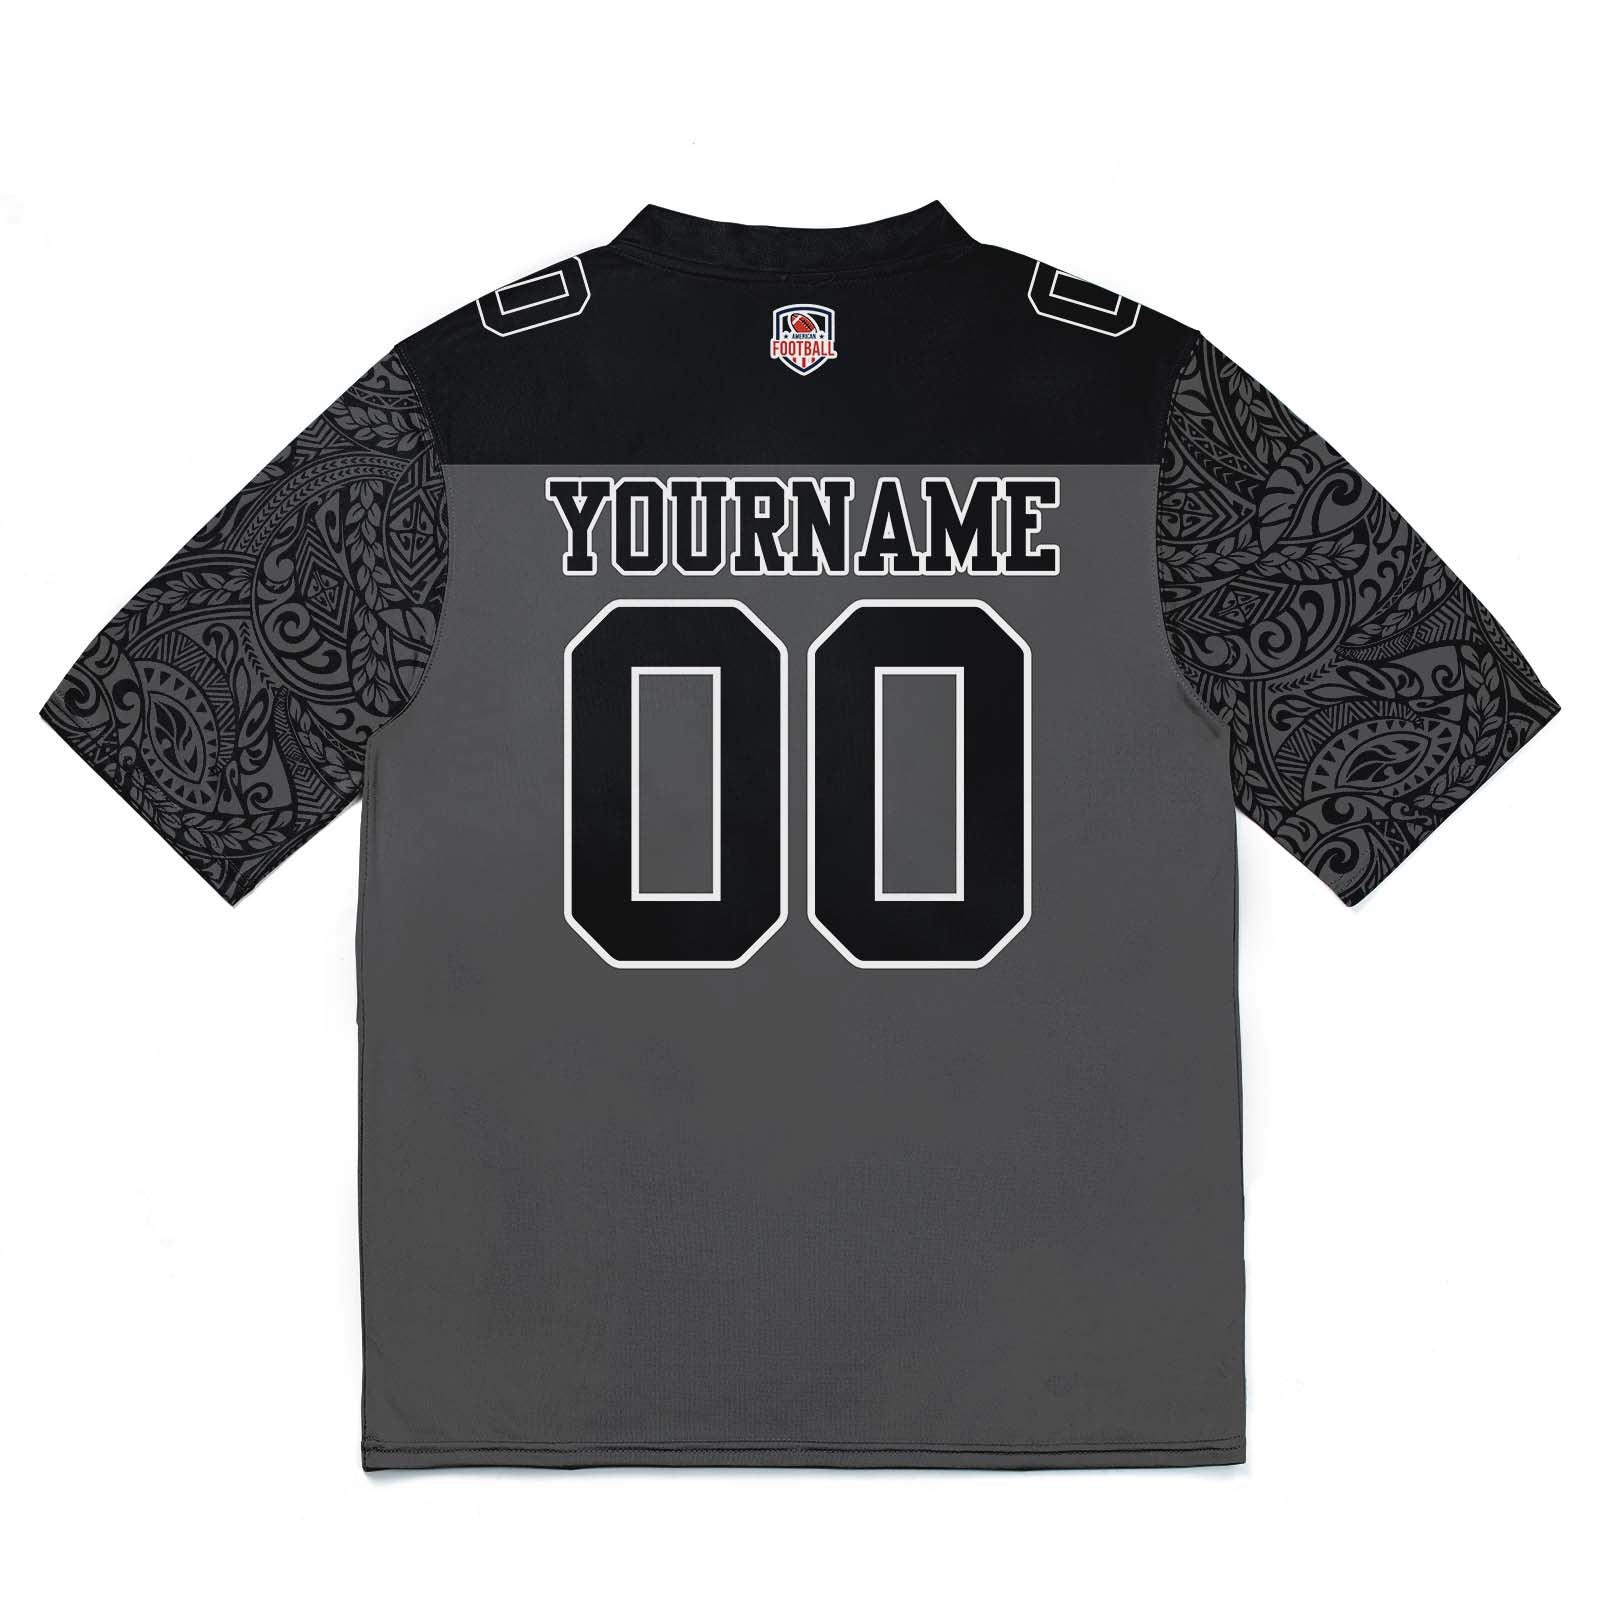 Custom Football Jersey Shirt Personalized Stitched Printed Team Name Number Black&Grey